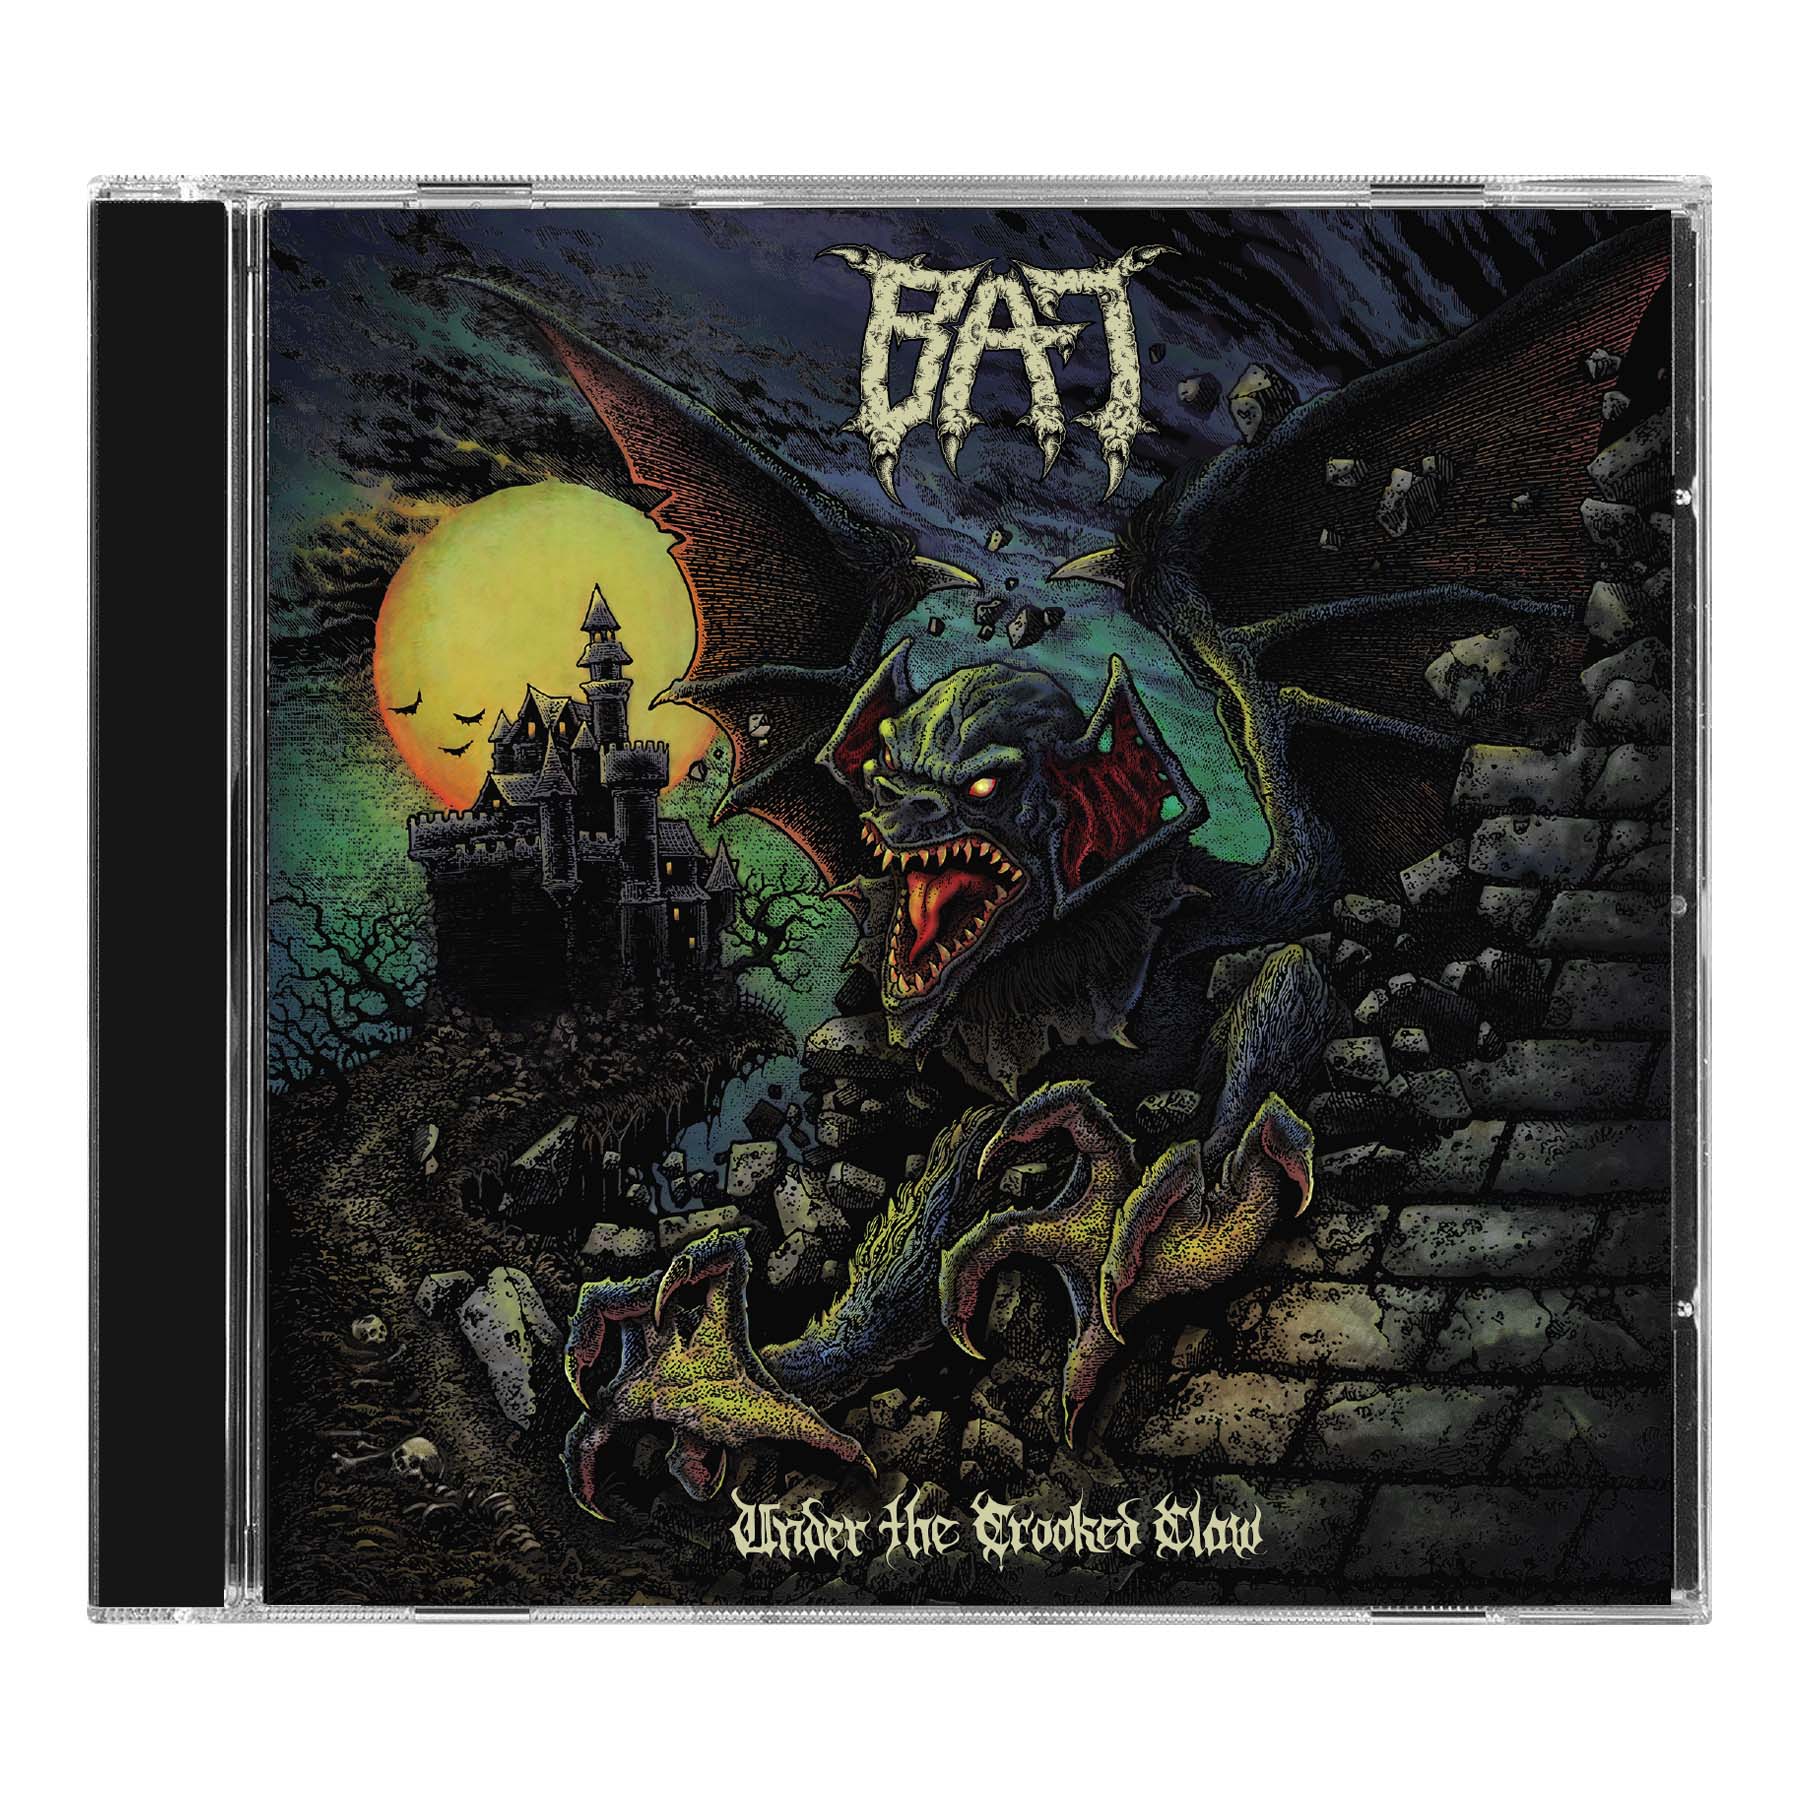 BAT "Under The Crooked Claw" CD - PRE-ORDER